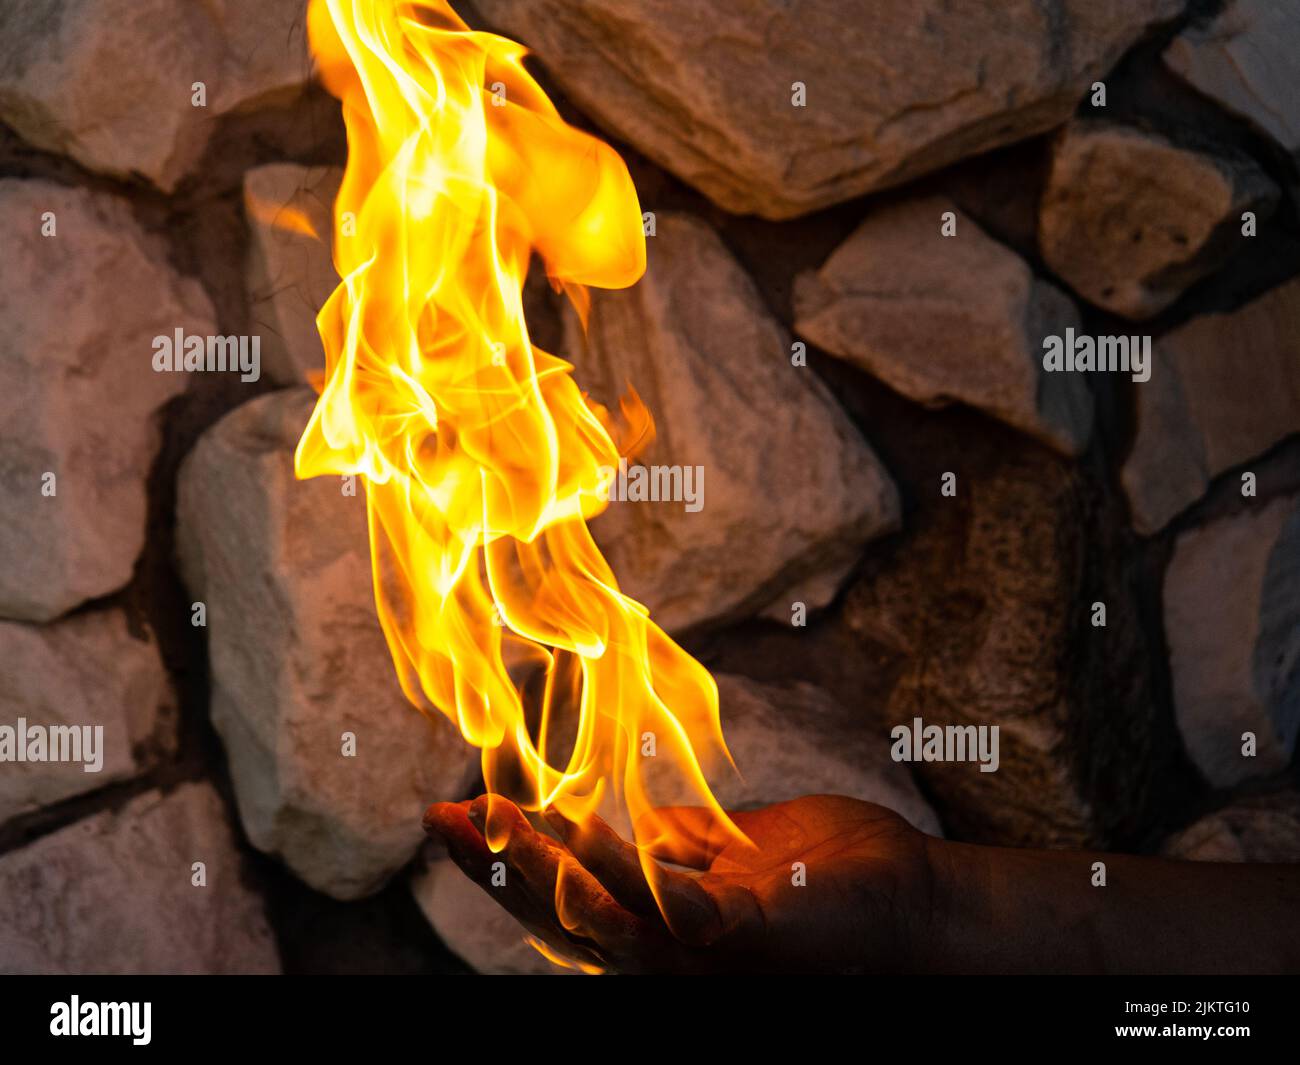 A closeup of the burning flames of fire on top of the man's hand holding near the brick wall Stock Photo